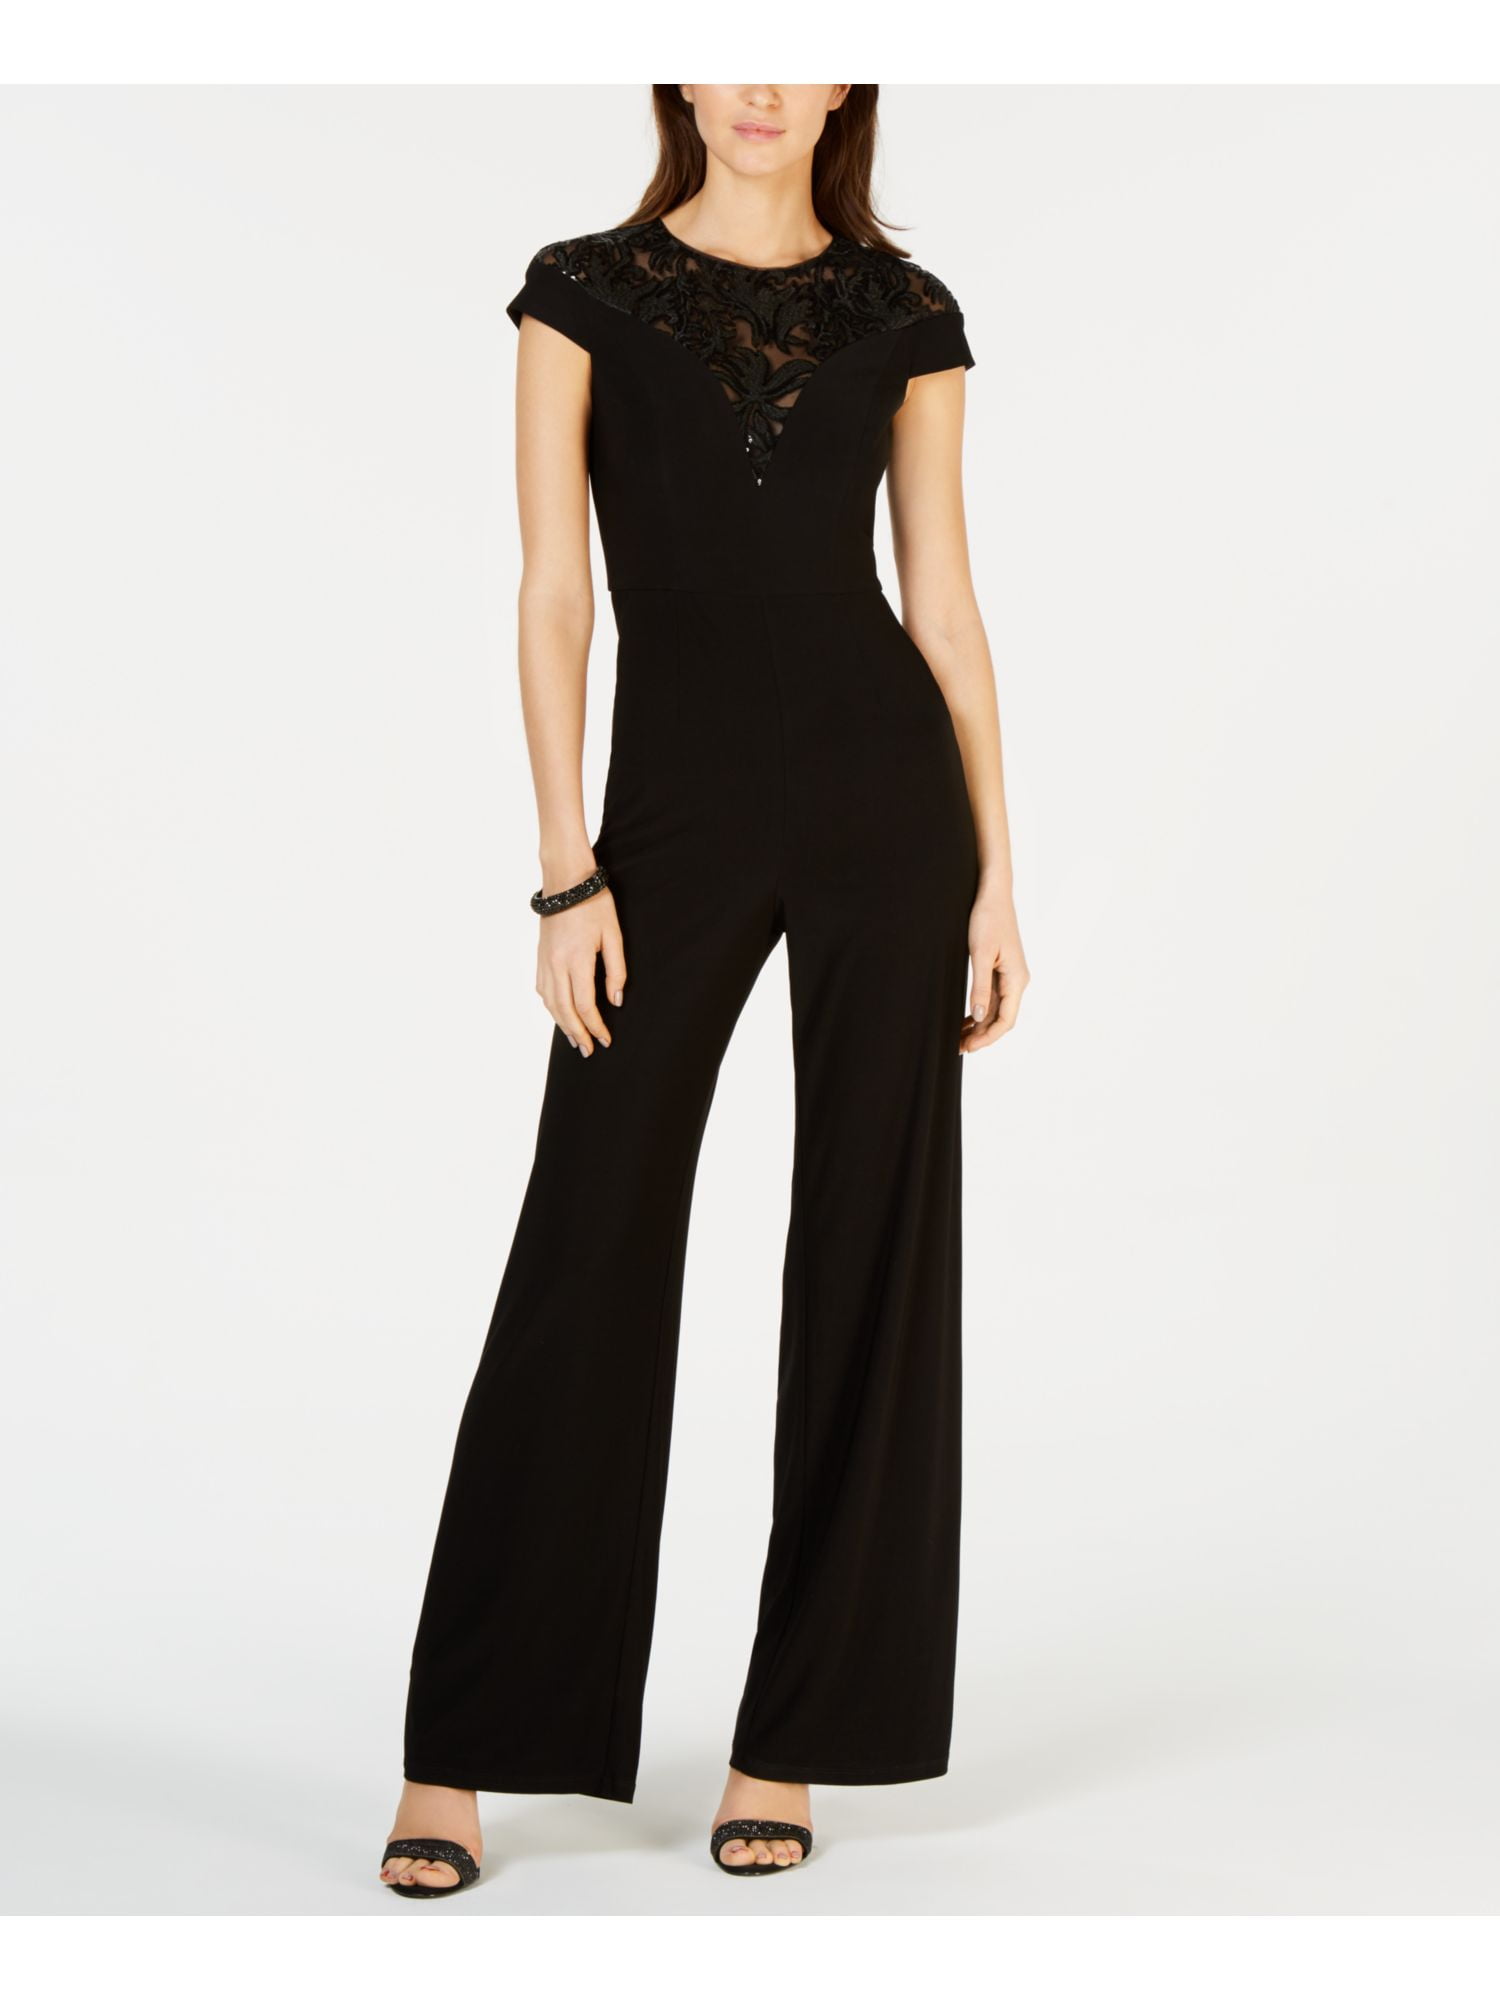 Adrianna Papell - ADRIANNA PAPELL Womens Black Sequined Short Sleeve ...